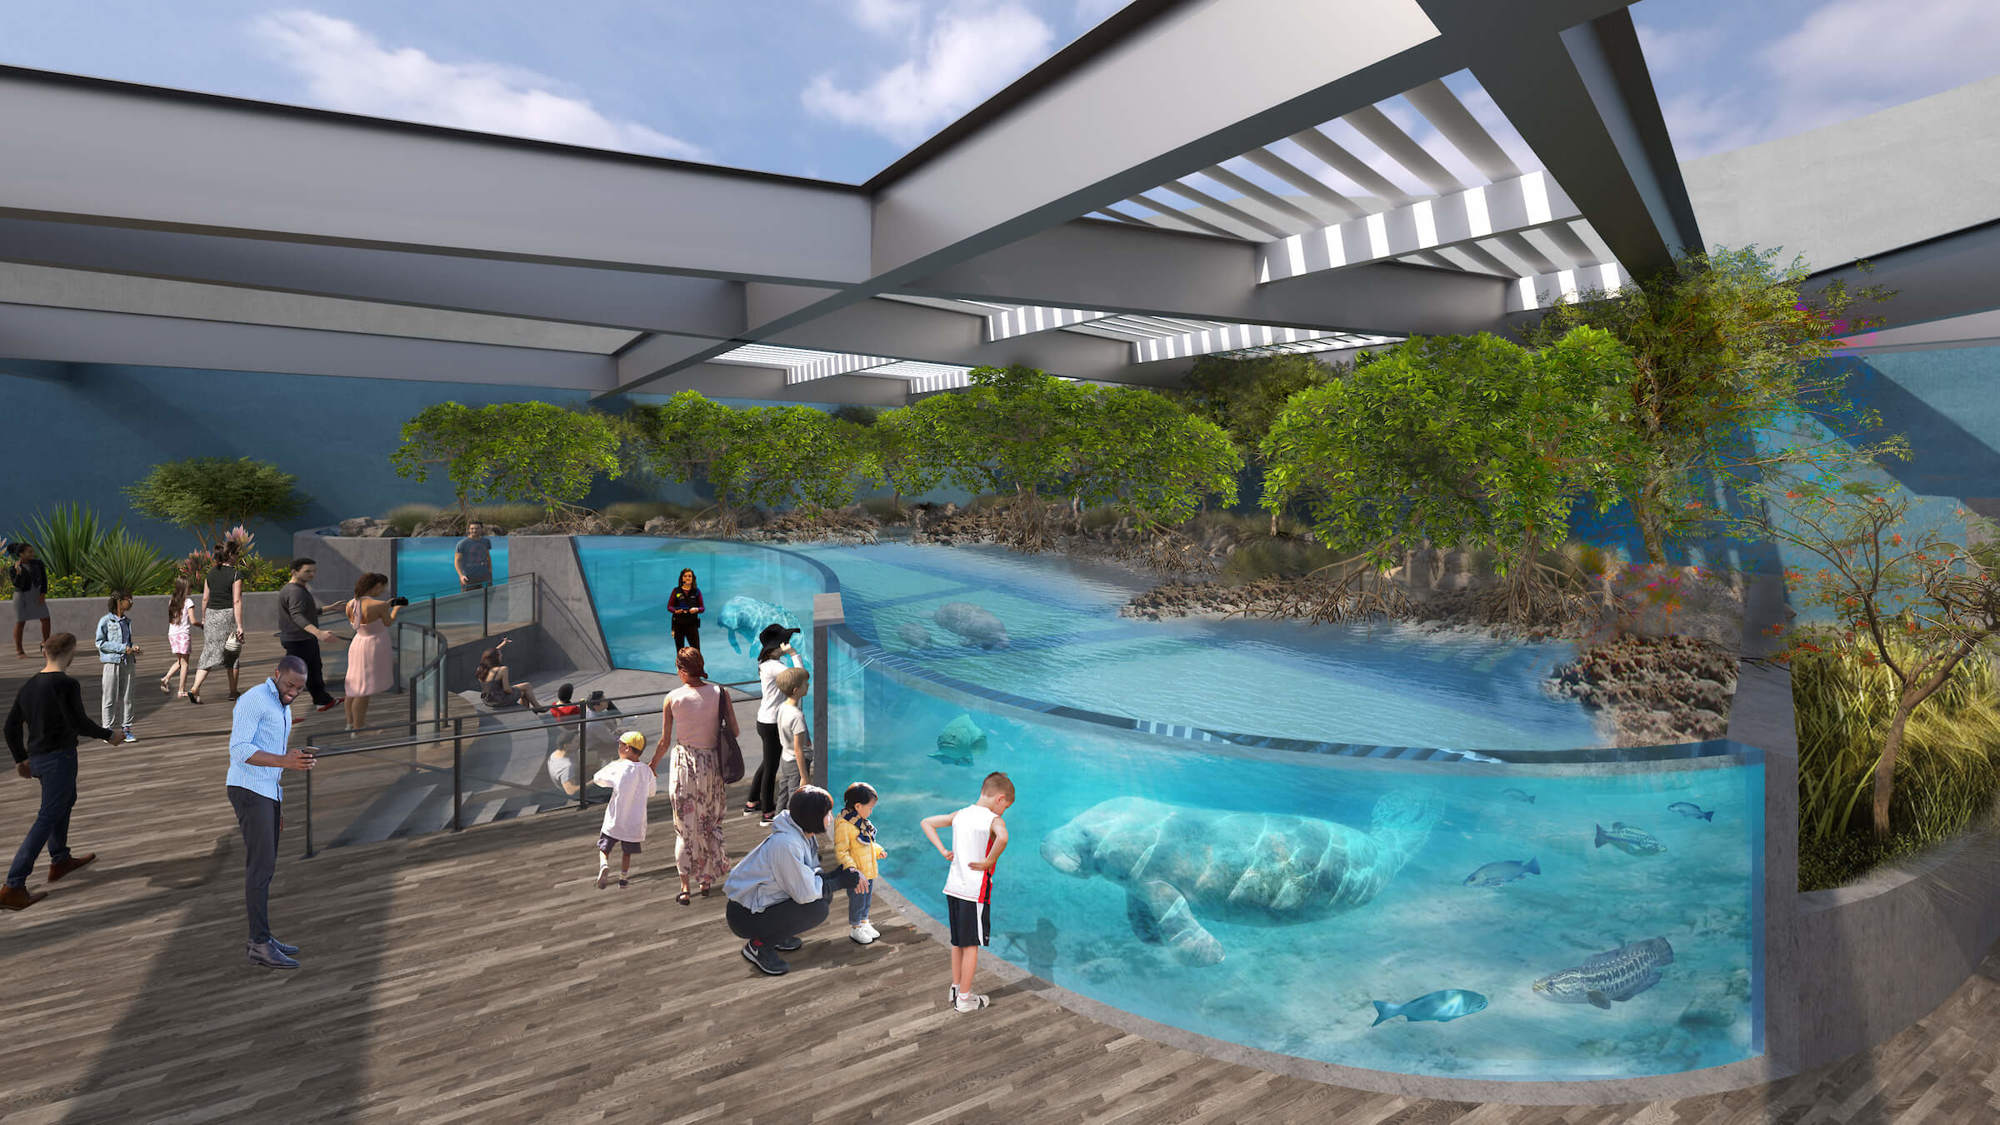 An exhibit of manatees will be located on the top floor of the three-story Mote SEA, requiring extraordinary construction methods. (Courtesy of Mote Marine Laboratory & Aquarium)